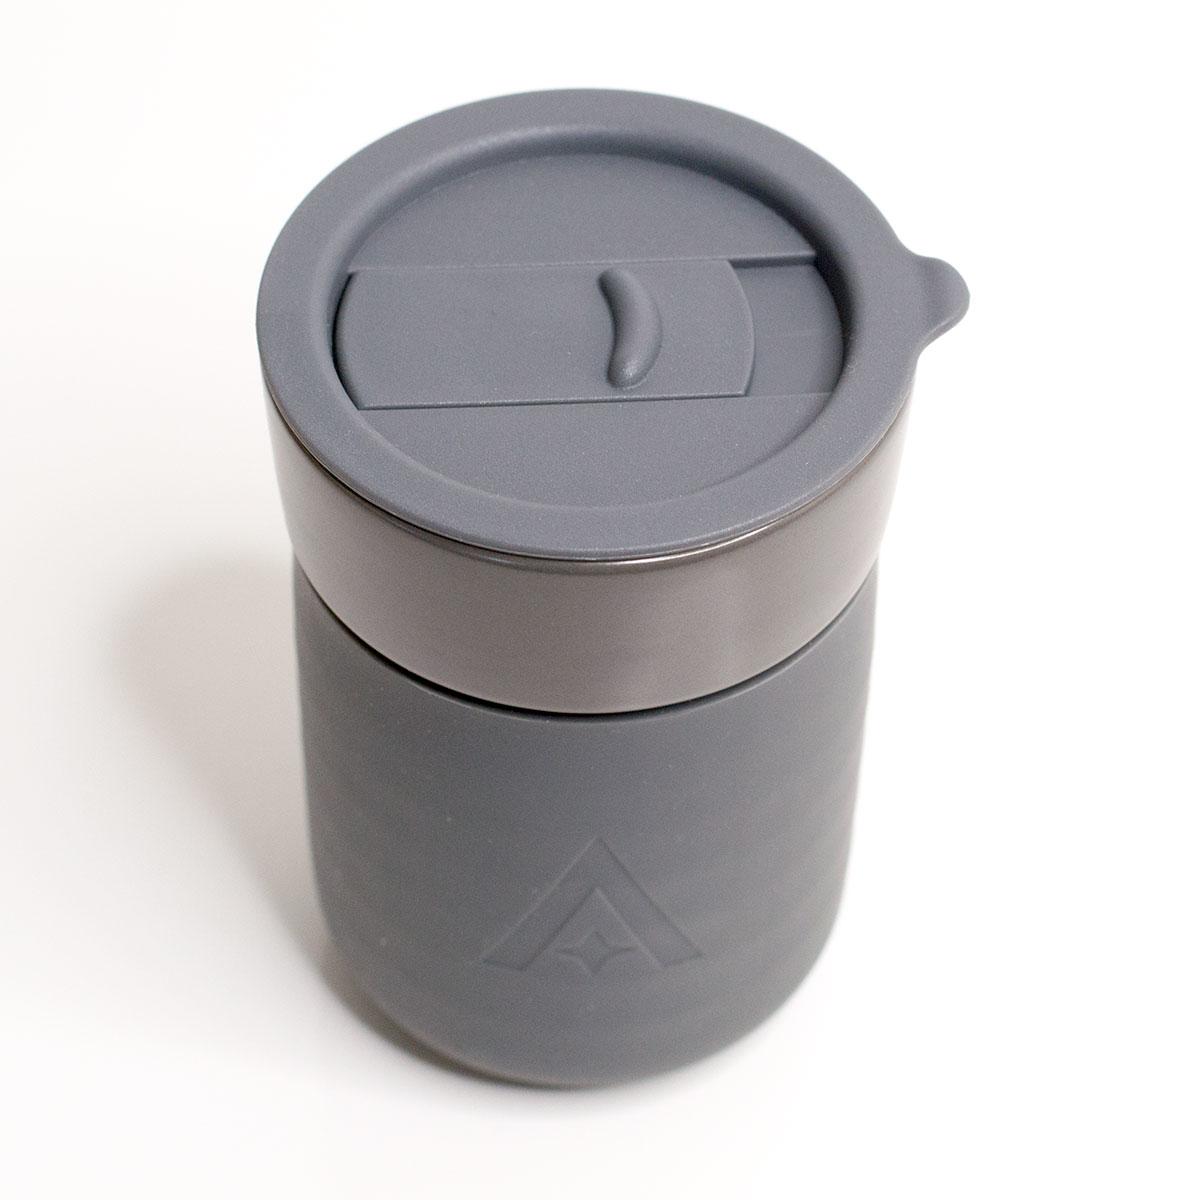 Carry Cup - The Universal Travel Mug by Uberstar (Space Grey)